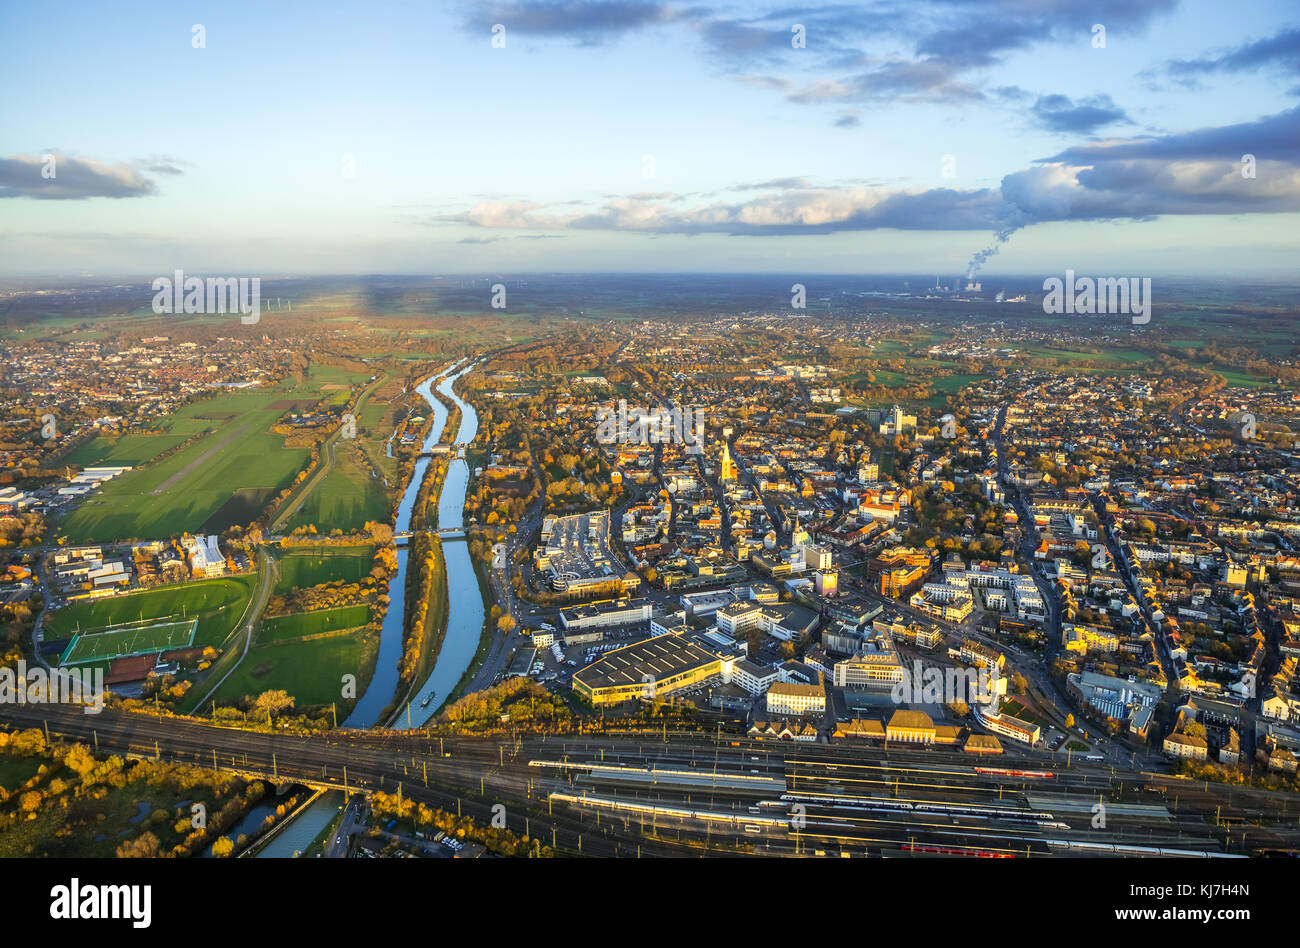 Overview of Hamm, Datteln-Hamm canal, project channel edge between the airport Hamm Lippewiesen and downtown Hamm, river Lippe, sports field at the hi Stock Photo